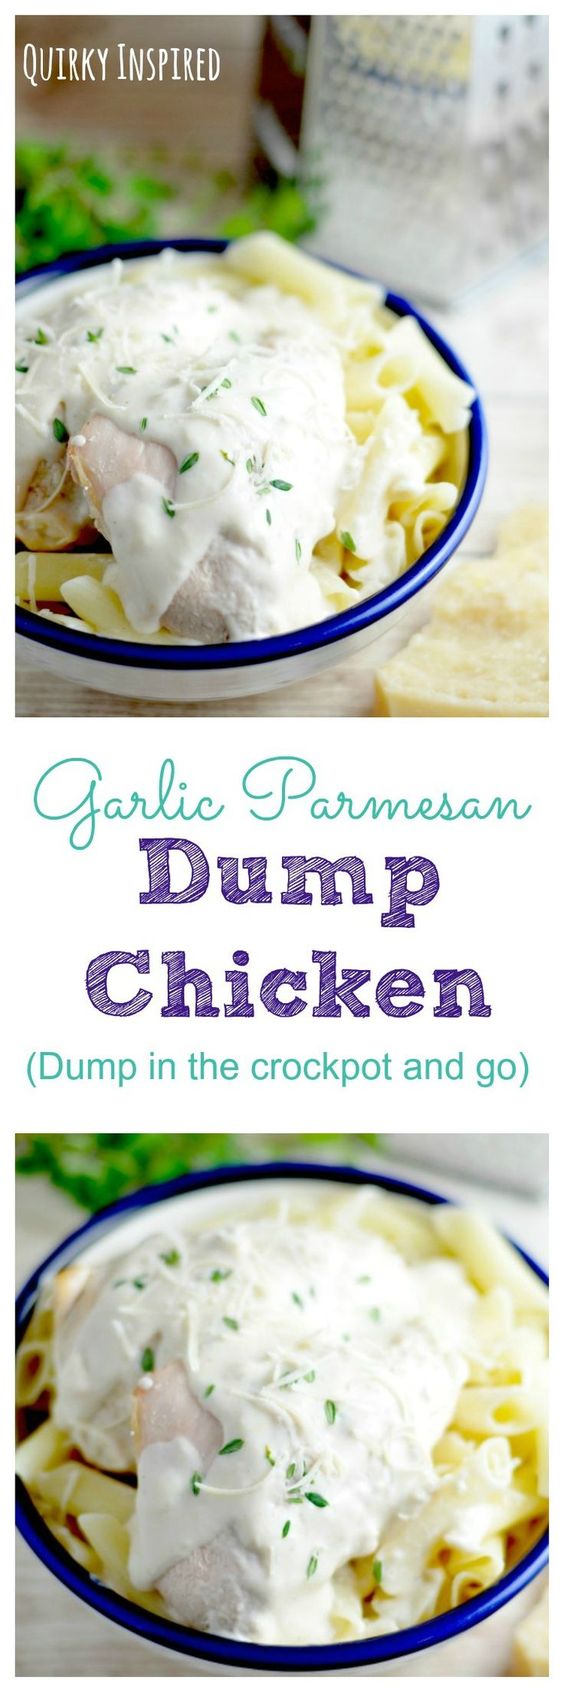 Sometimes no time for dinner happens. We need easy dinner ideas, and this dump chicken recipe is amazing! Just pull out your crockpot, dump and it's done! 